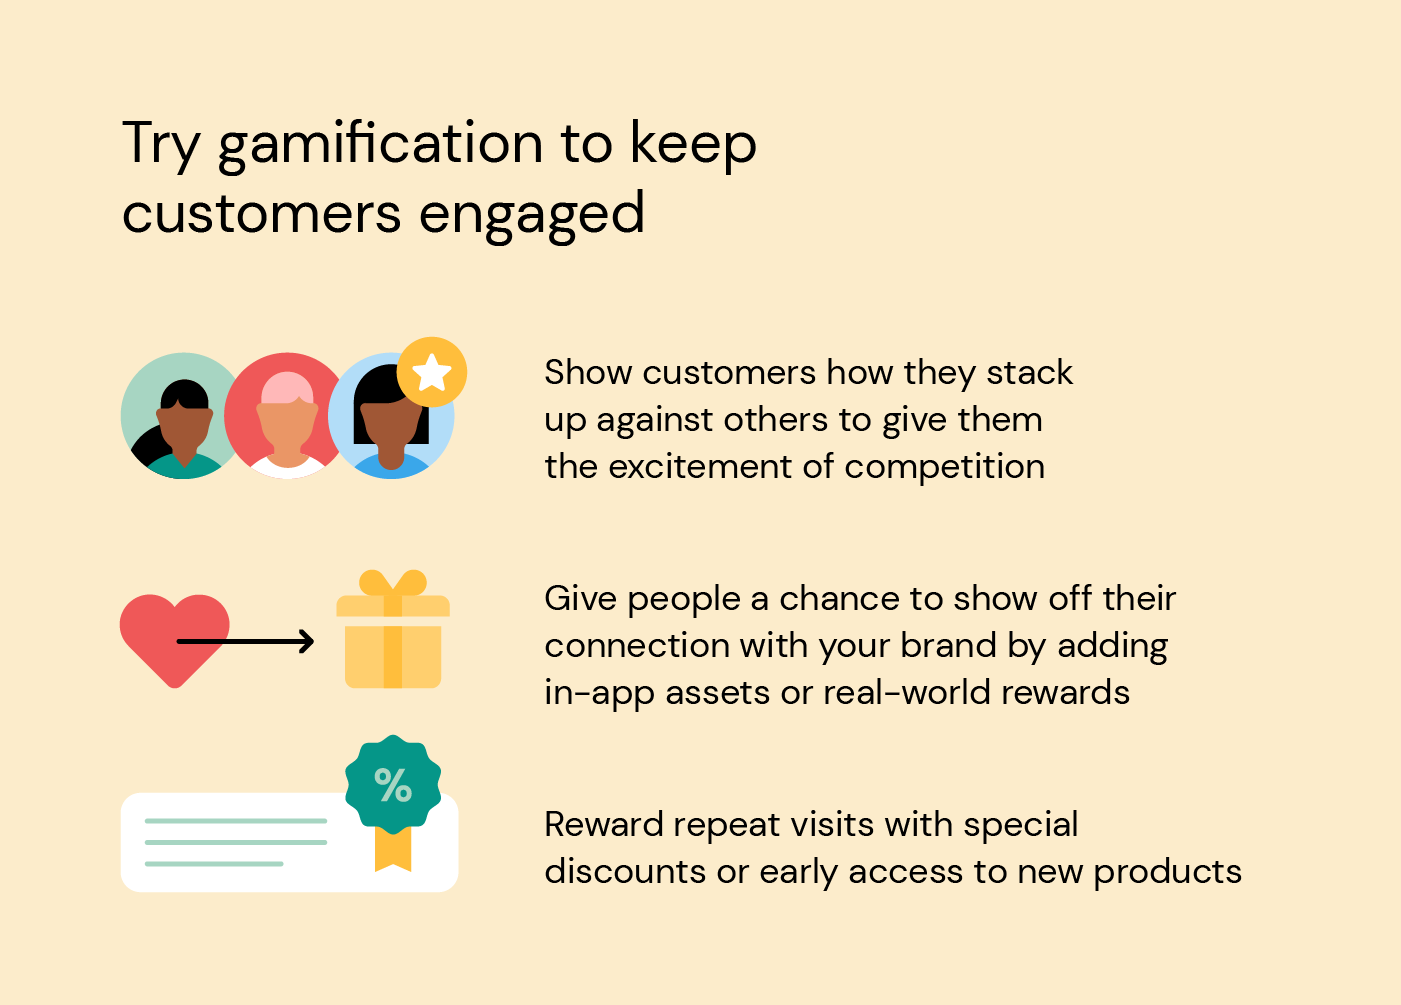 Illustration shows ways to engage customers through rewards and gamification